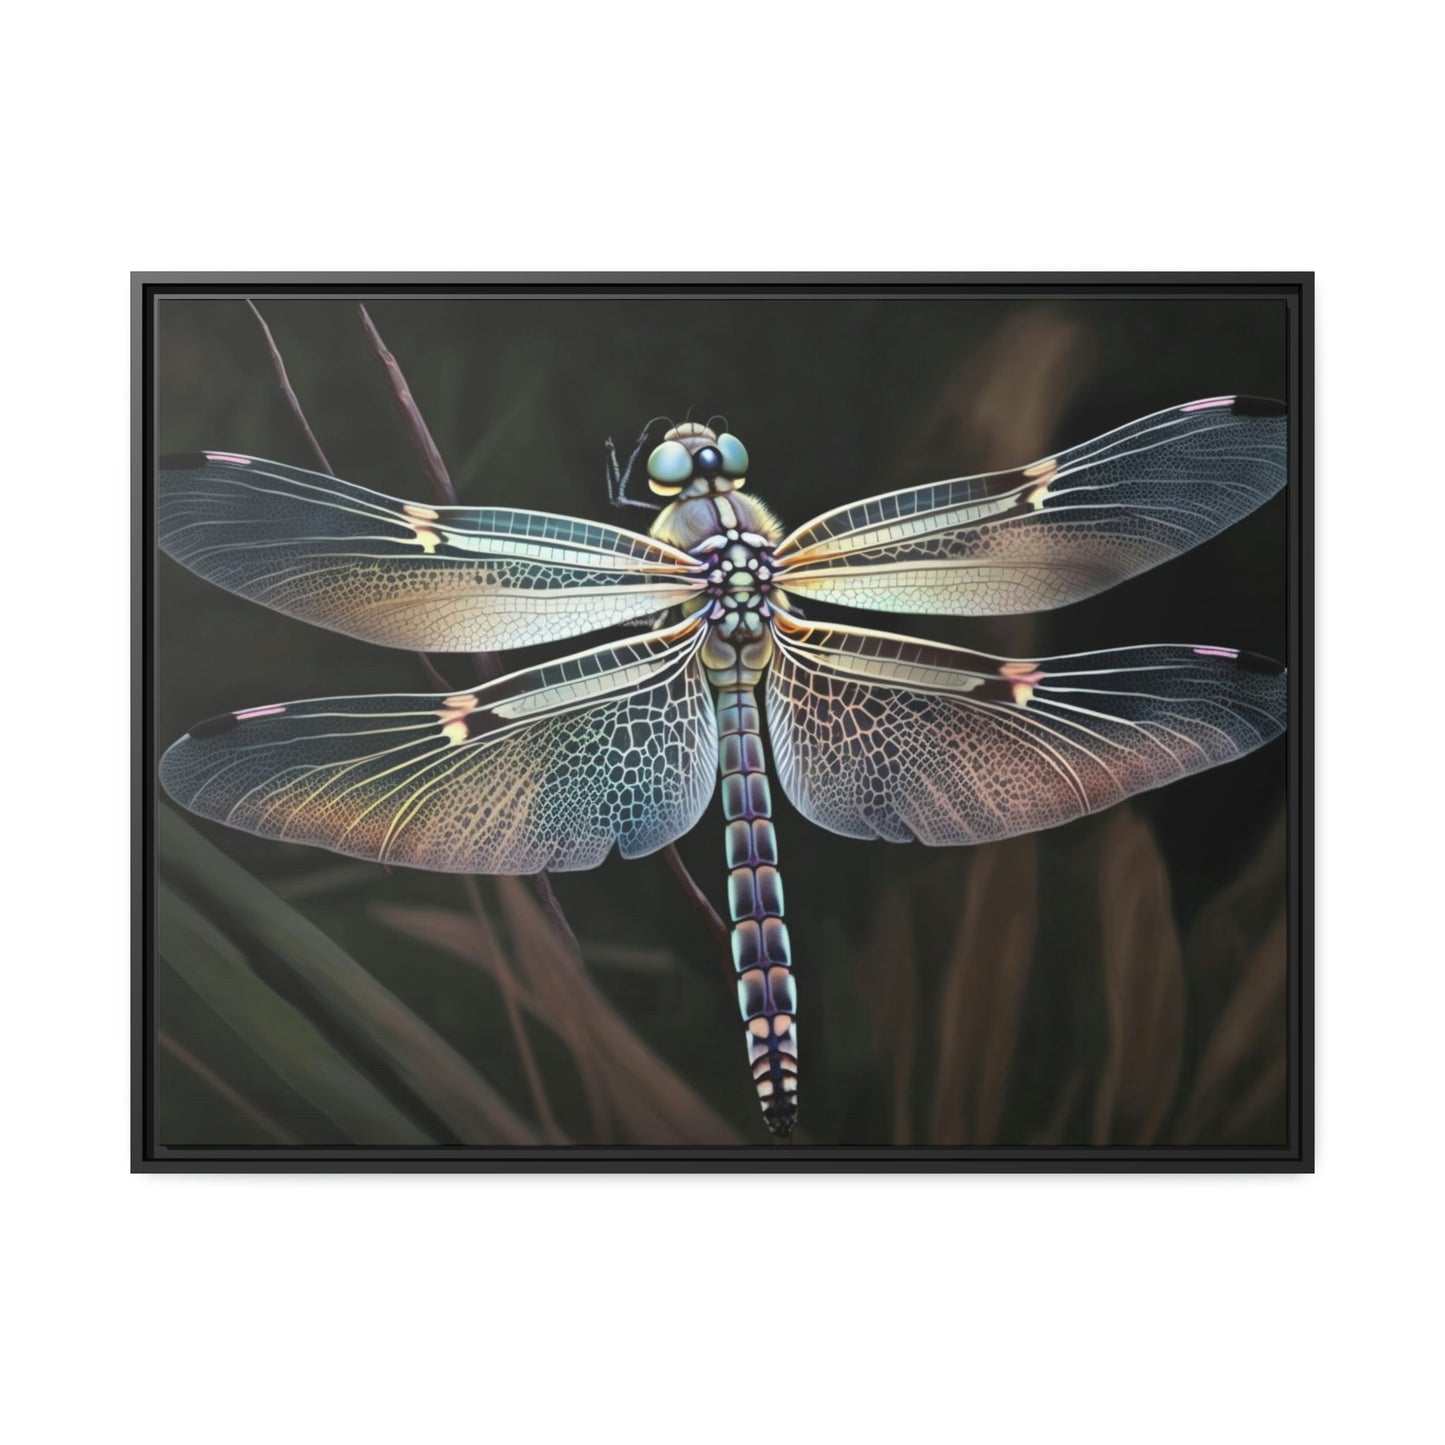 Dragonfly Delight: A Natural Canvas Print of Beautiful Insects